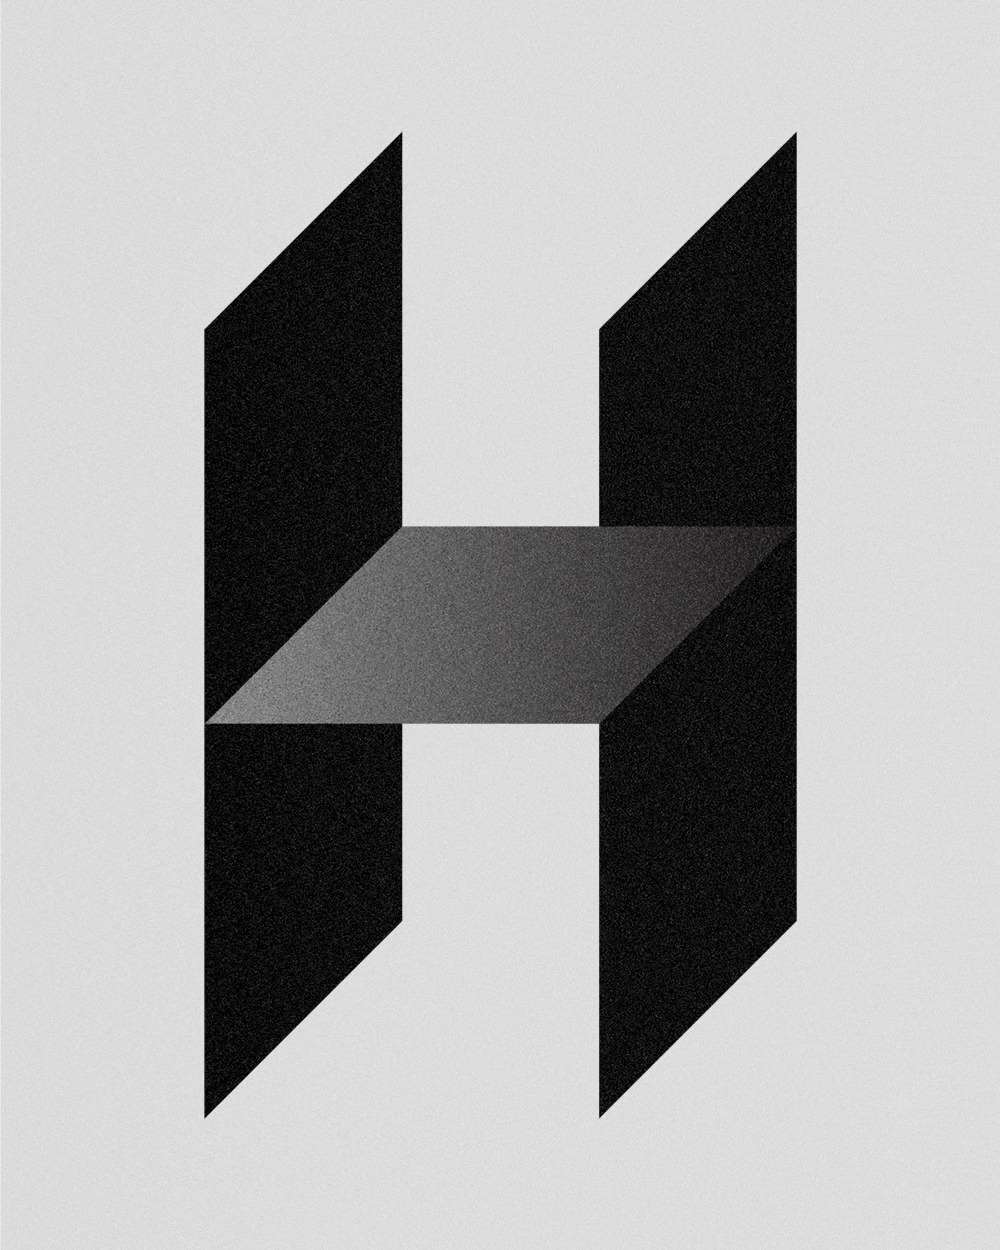 H is for Hermann Helmholtz